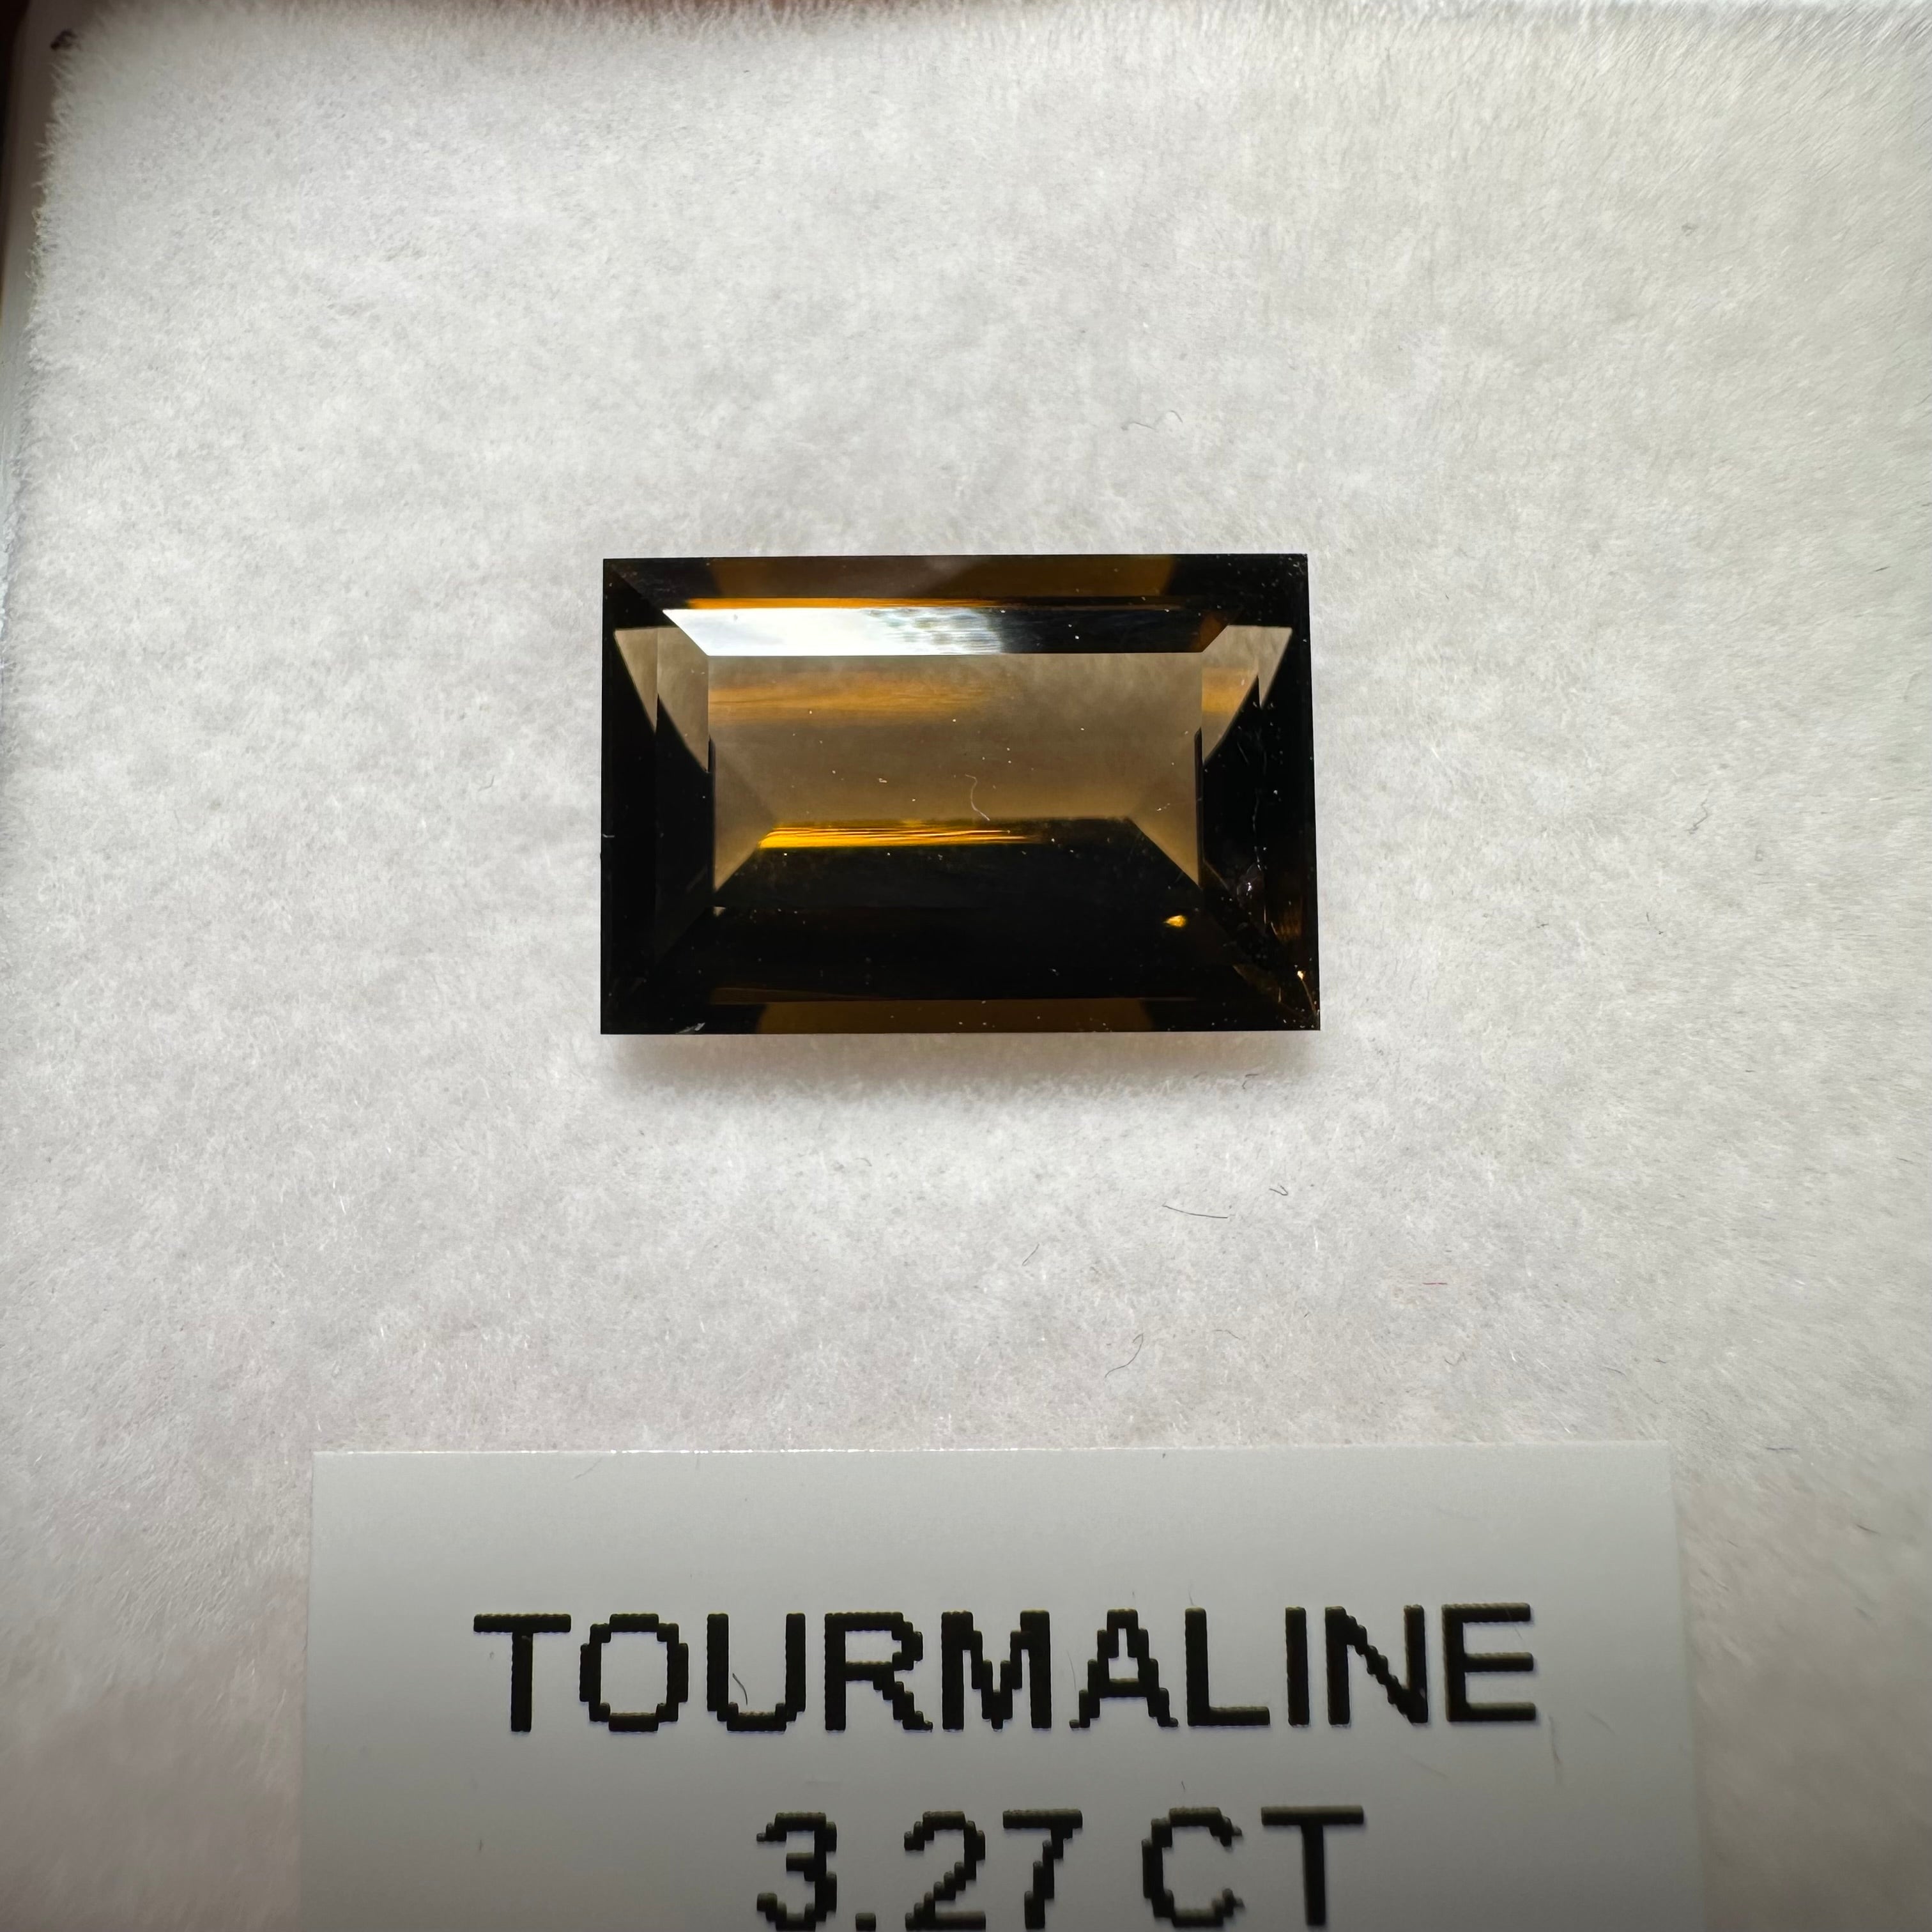 3.27ct Tanzanian Tourmaline, Untreated Unheated - slight inclusion under crown, you can see from pics